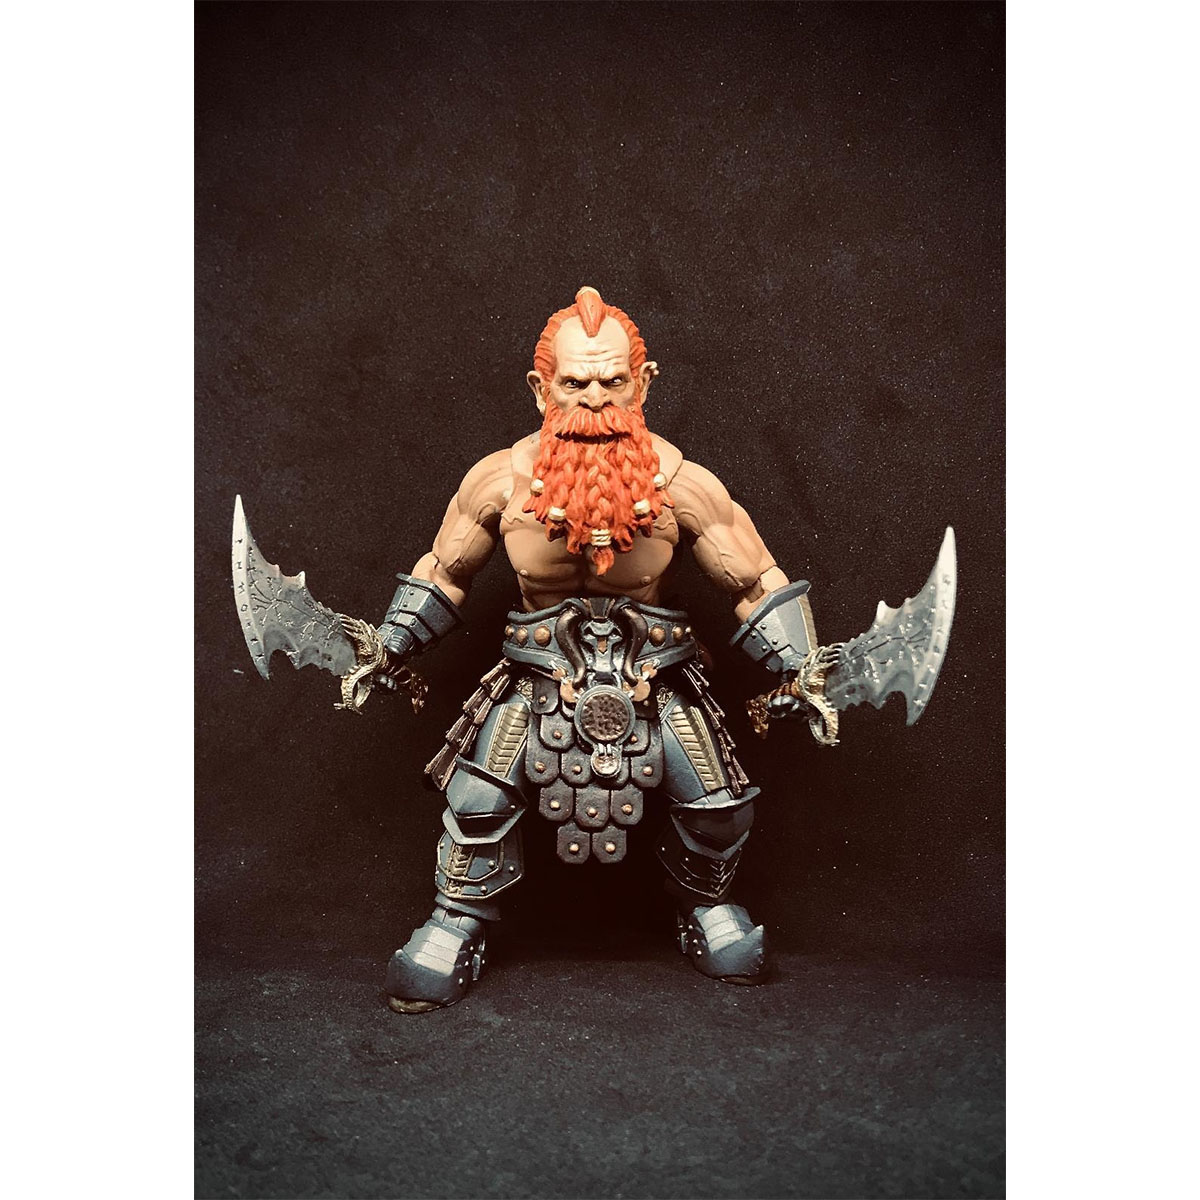 The custom figures and art of Kevin Delies